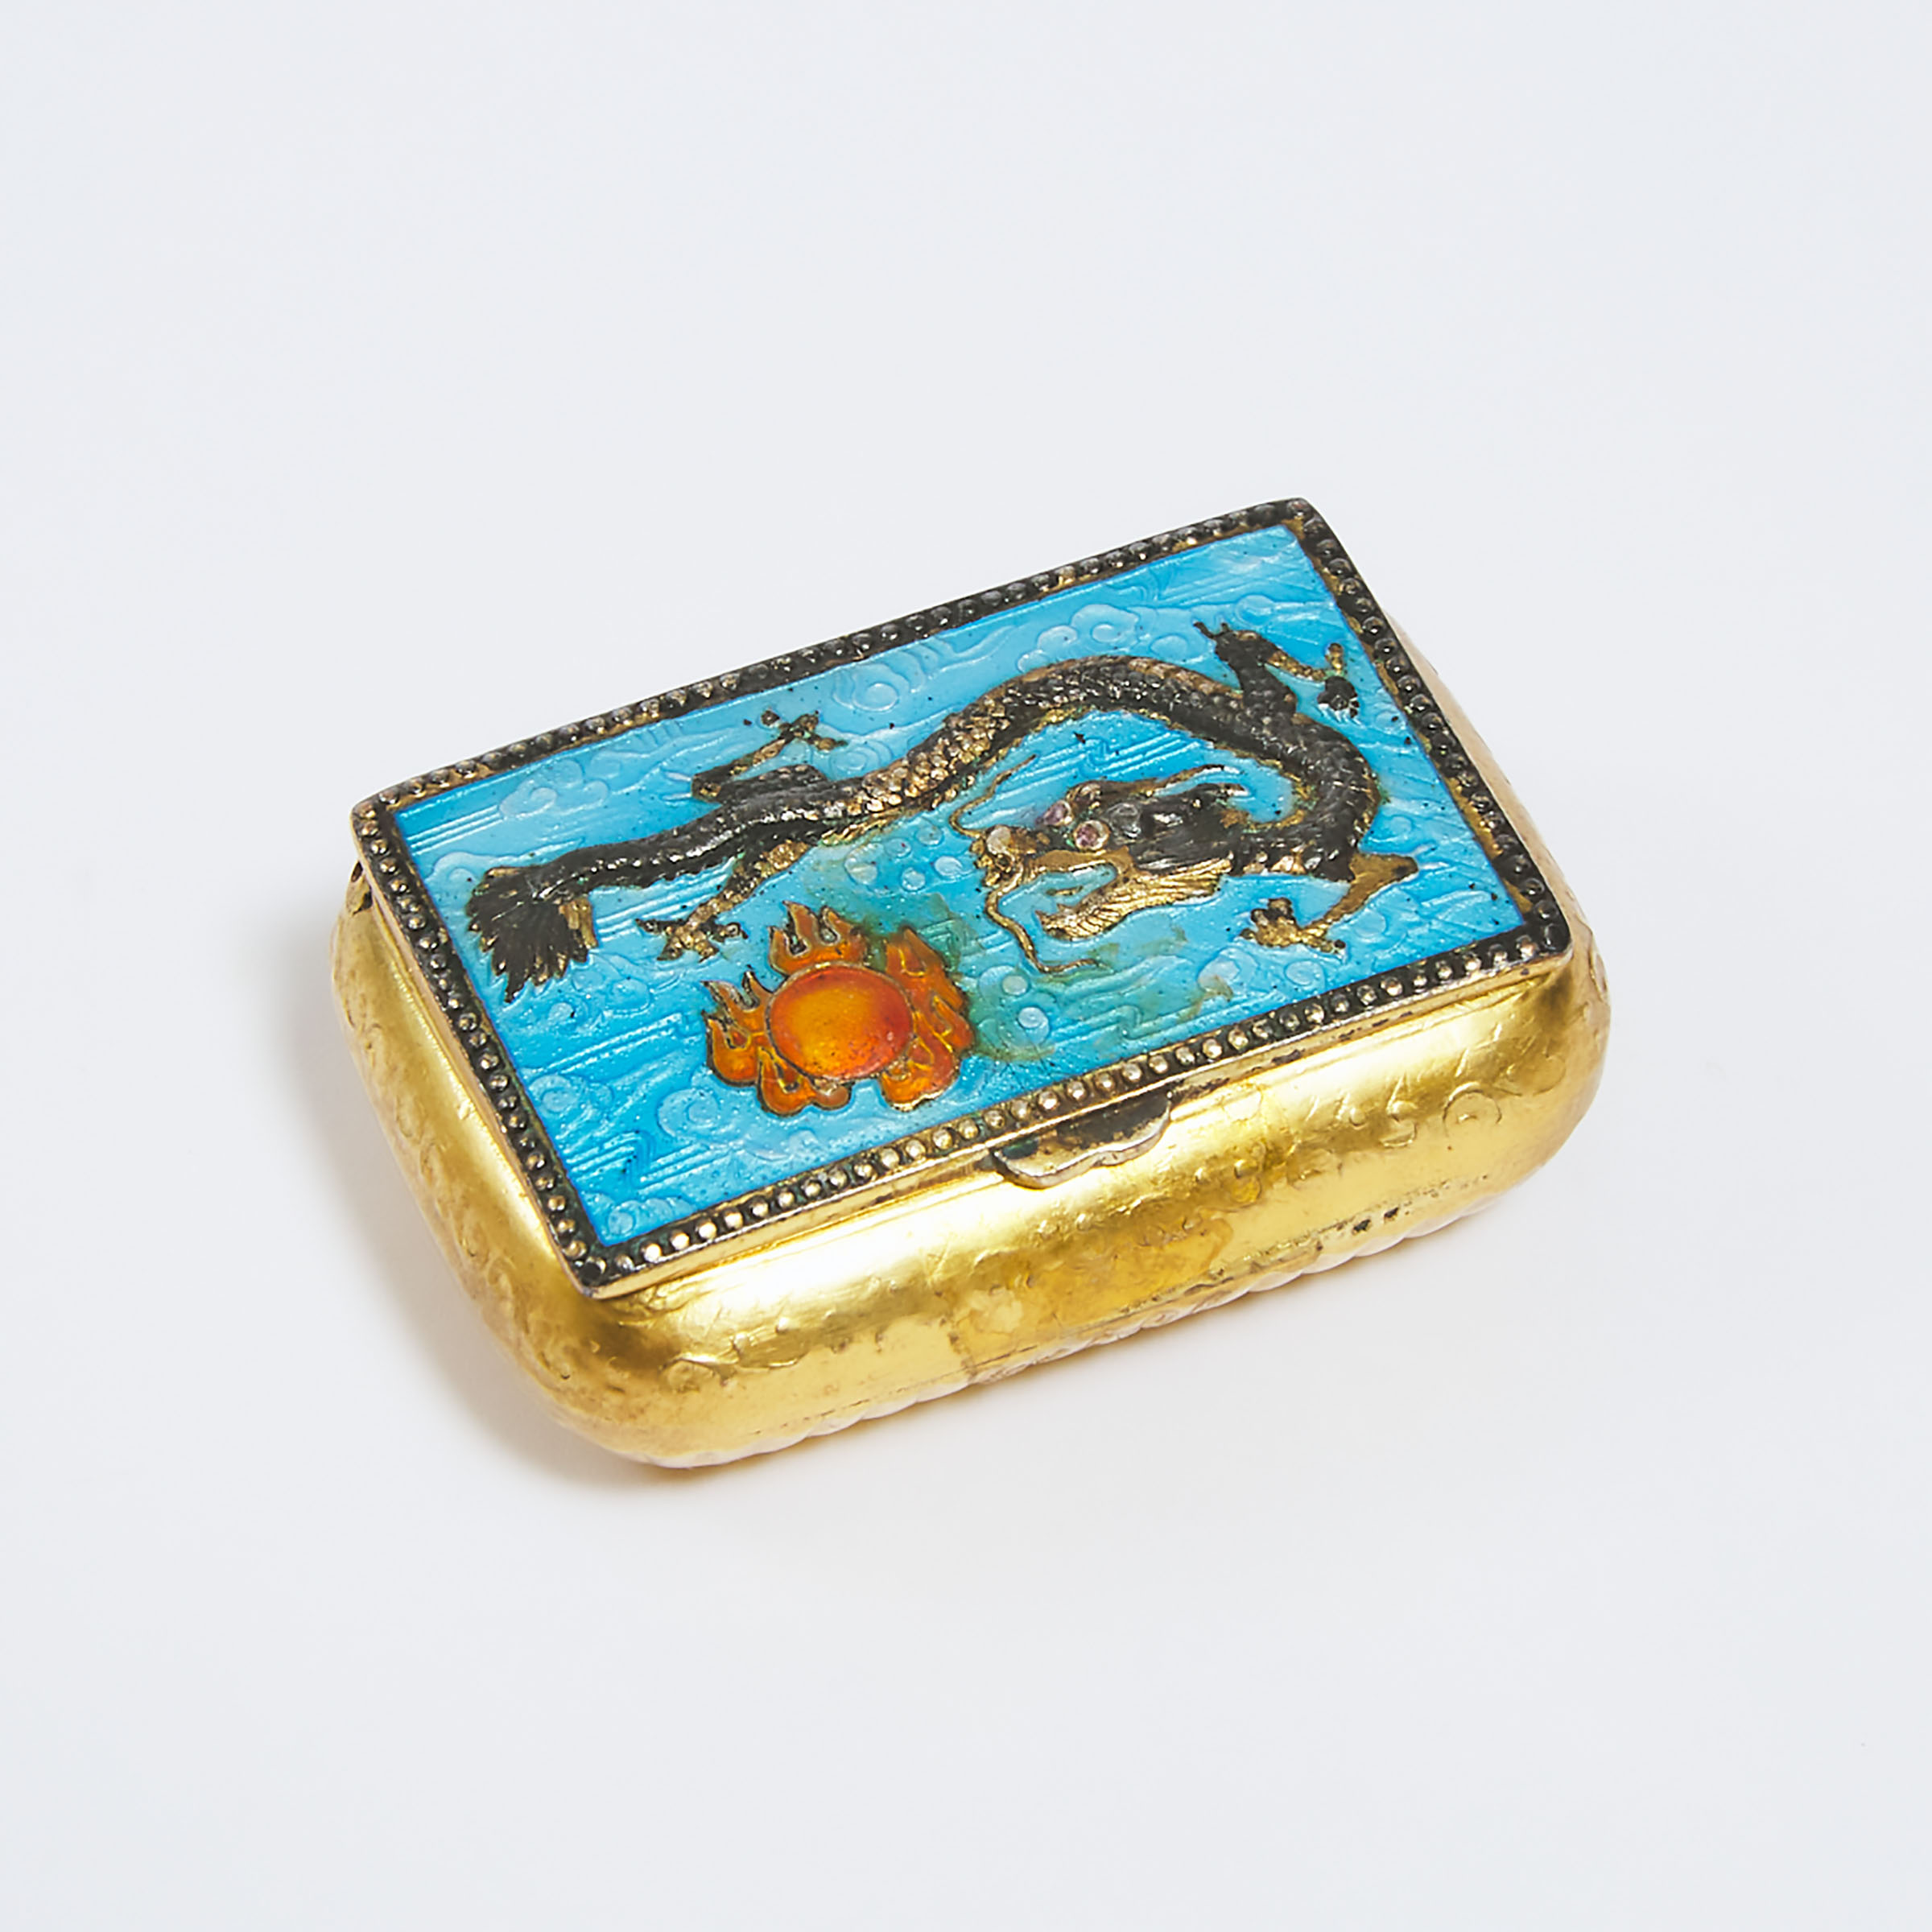 A Small Gilt Enameled Silvered